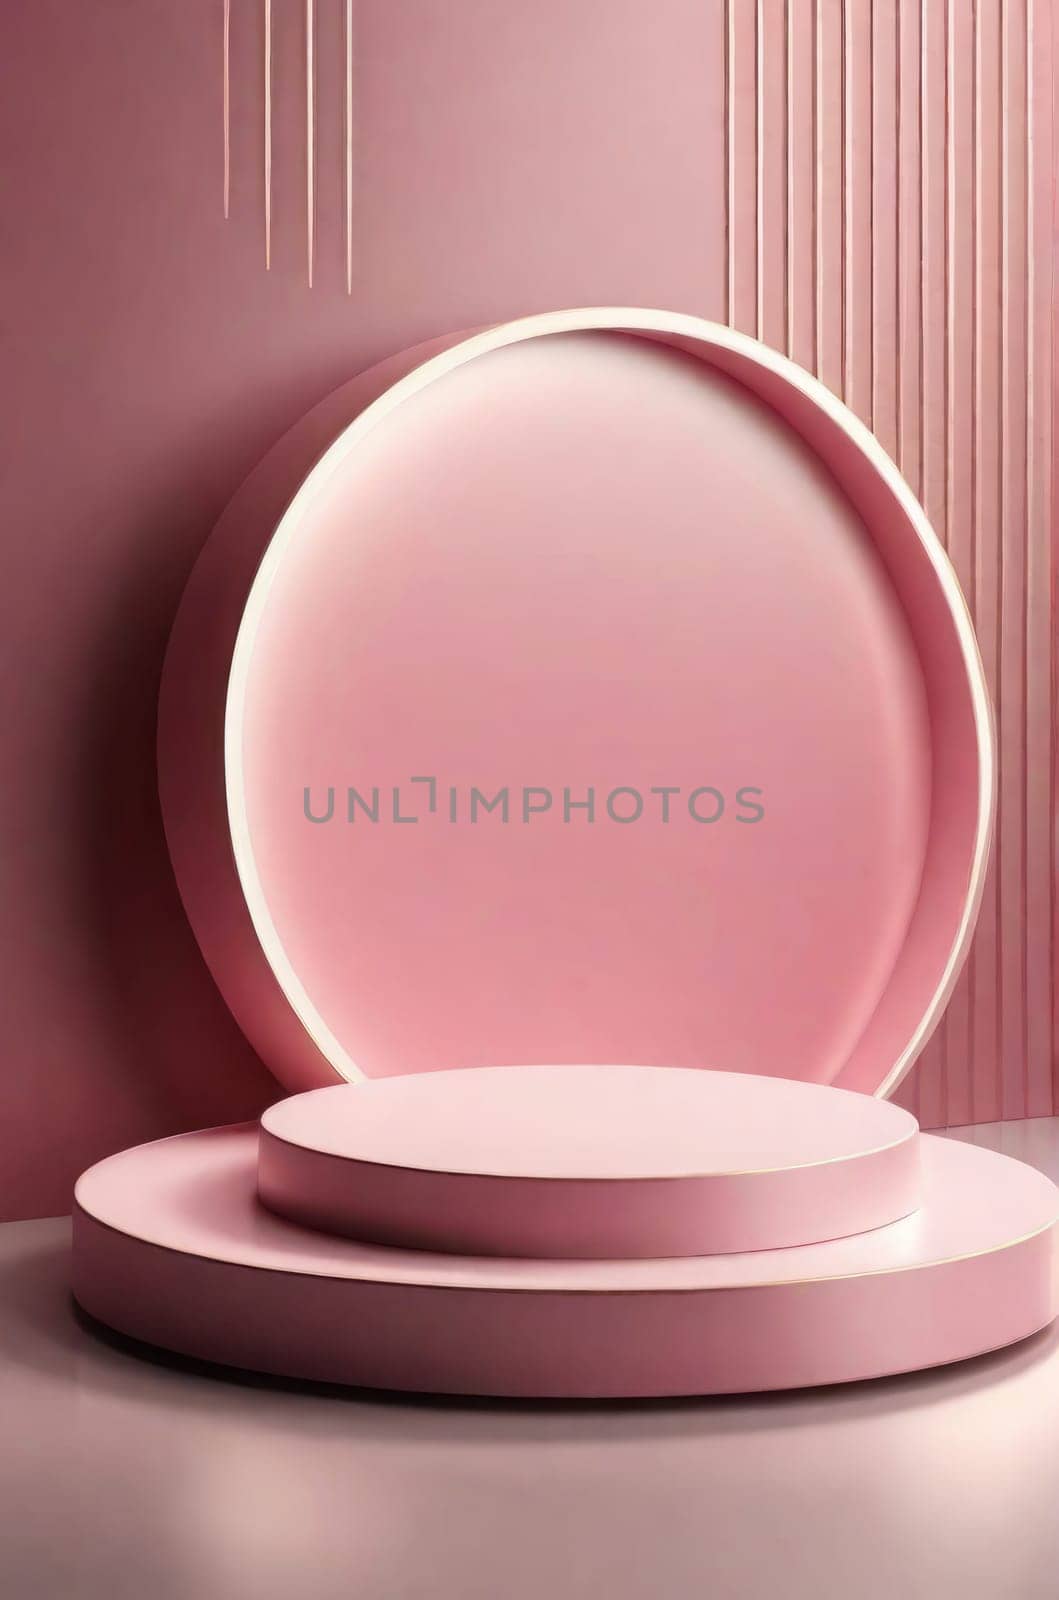 three-dimensional pink realistic product podium in rays of light on a monochrome background